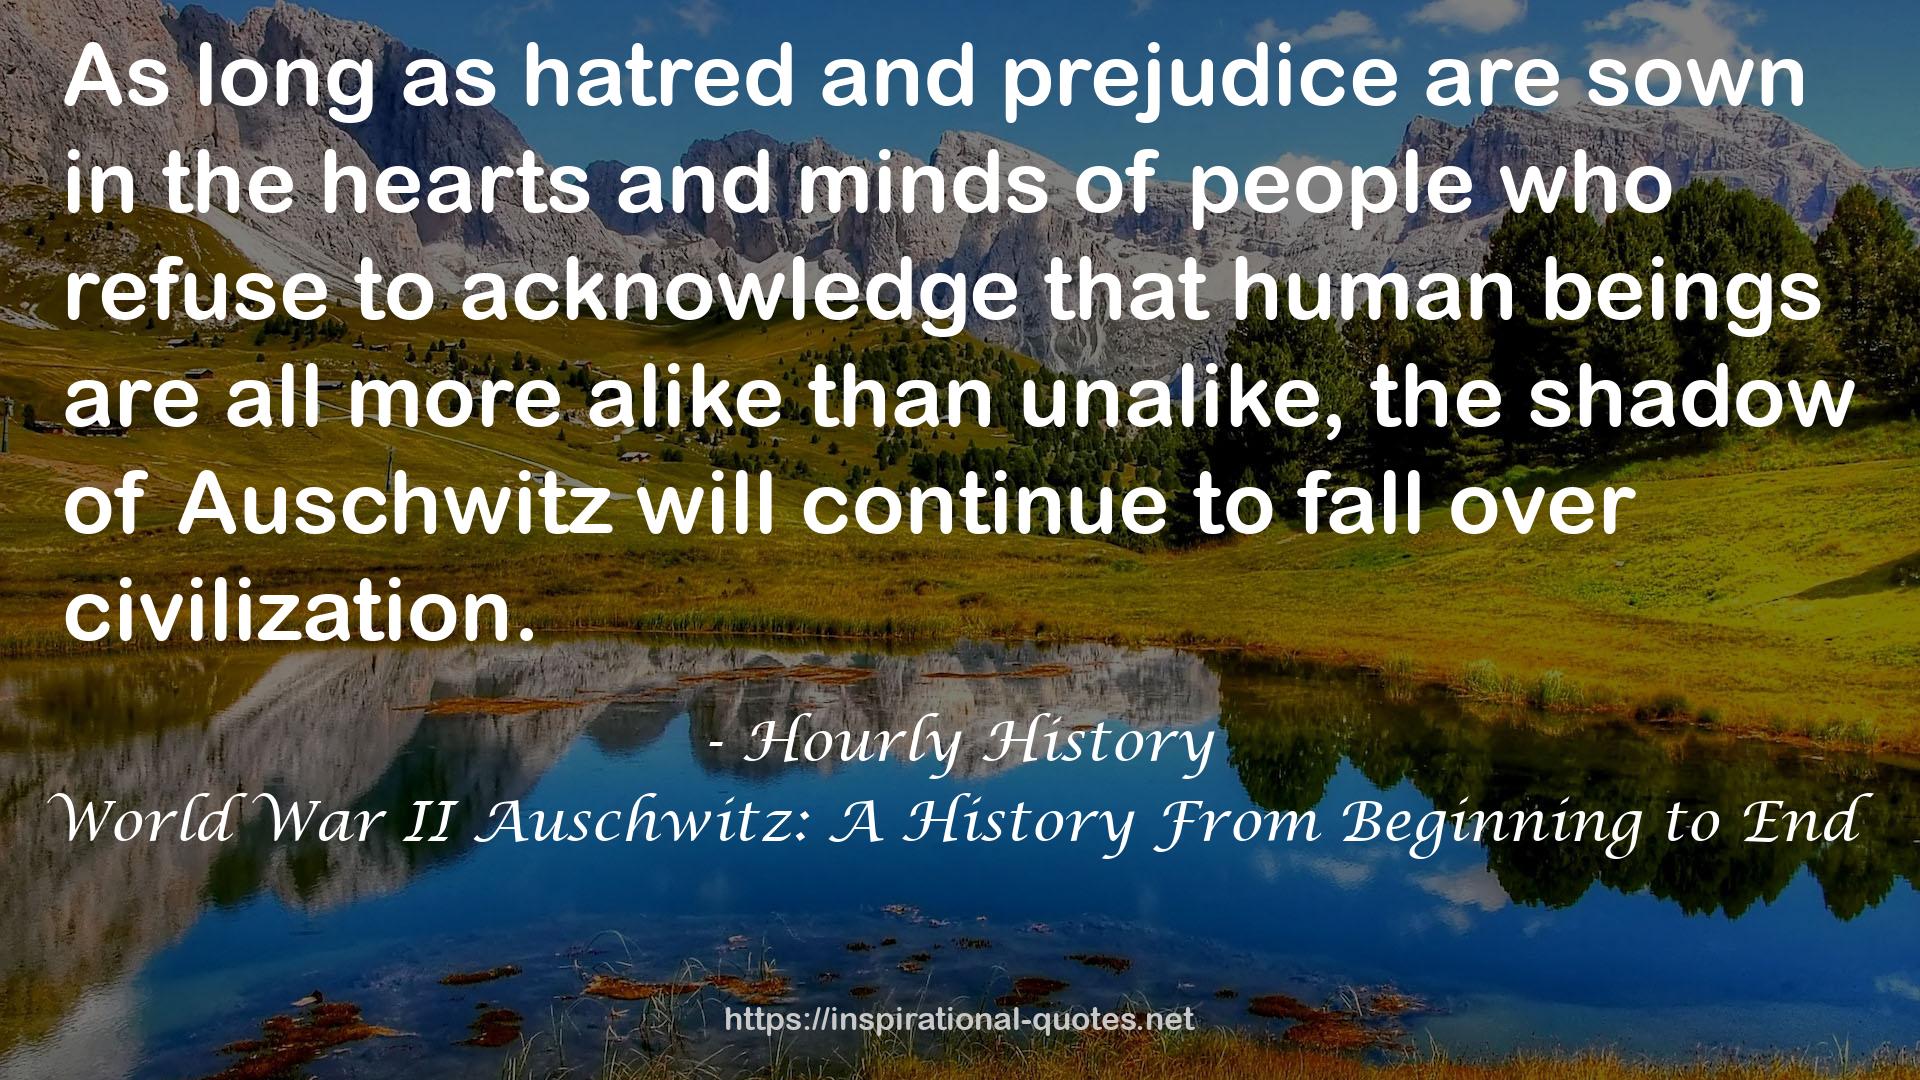 World War II Auschwitz: A History From Beginning to End QUOTES